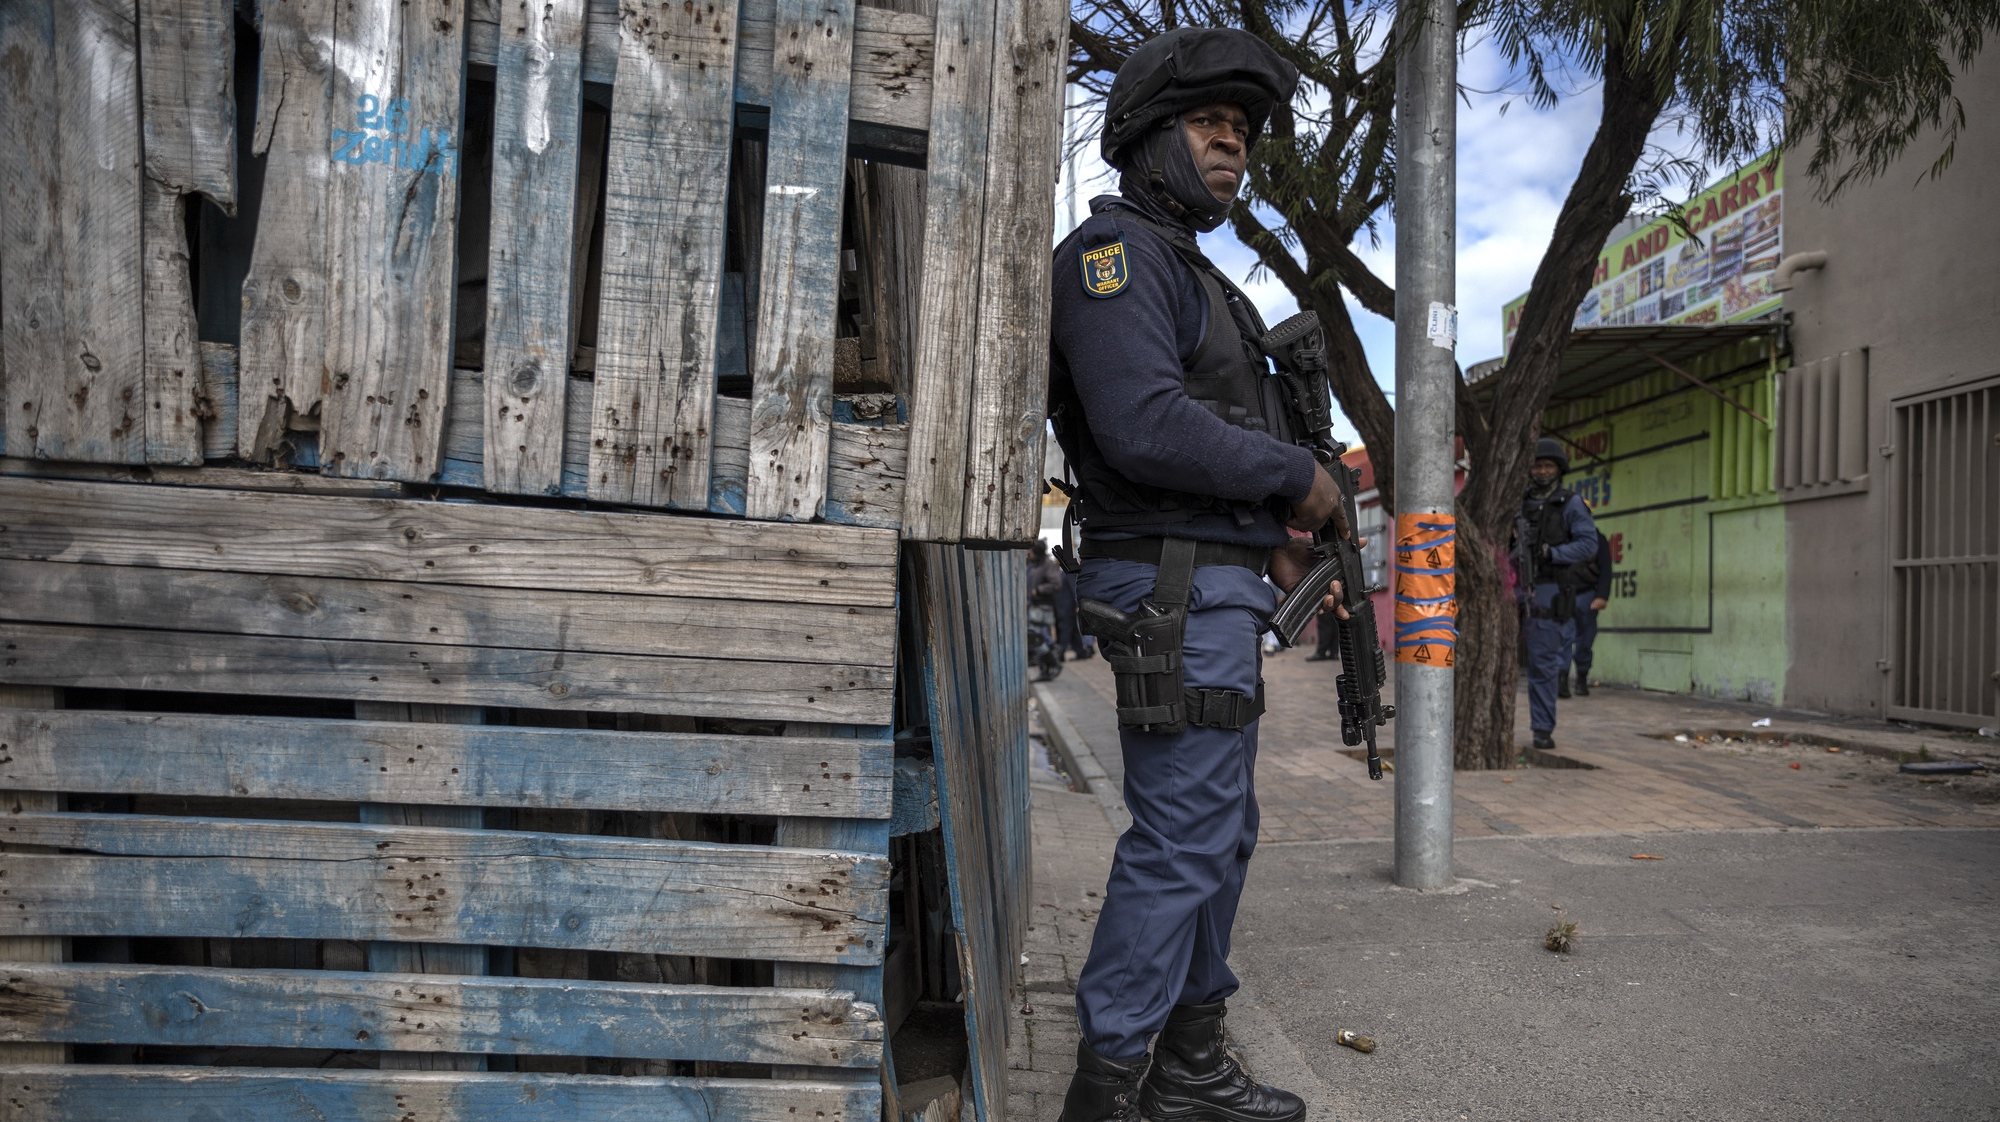 epa07770139 South African Policemen on the Cape Flats in Mitchells Plain, Cape Town, South Africa, 12 August 2019. According to South African Minister of police General Bheki Cele there have been 1004 arrests during Operation Lockdown over the past month. Operation Lockdown is a joint operation between the South African Police Services (SAPS) and the South African National Defence Force (SANDF) aimed at tackling the alarming and rising number of gang related crimes on the Cape Flats. The Cape Flats is an area where non-white South Africans from Cape Town were sent by forced removal as part of the group areas act during the apartheid era. 50 years on from this the area has become a crime hotspot in the country with rampant gang activity and high numbers of murders and killings of innocent members of the community. Over 1300 SANDF soldiers have been deployed to assist the police with this operation.  EPA/NIC BOTHMA